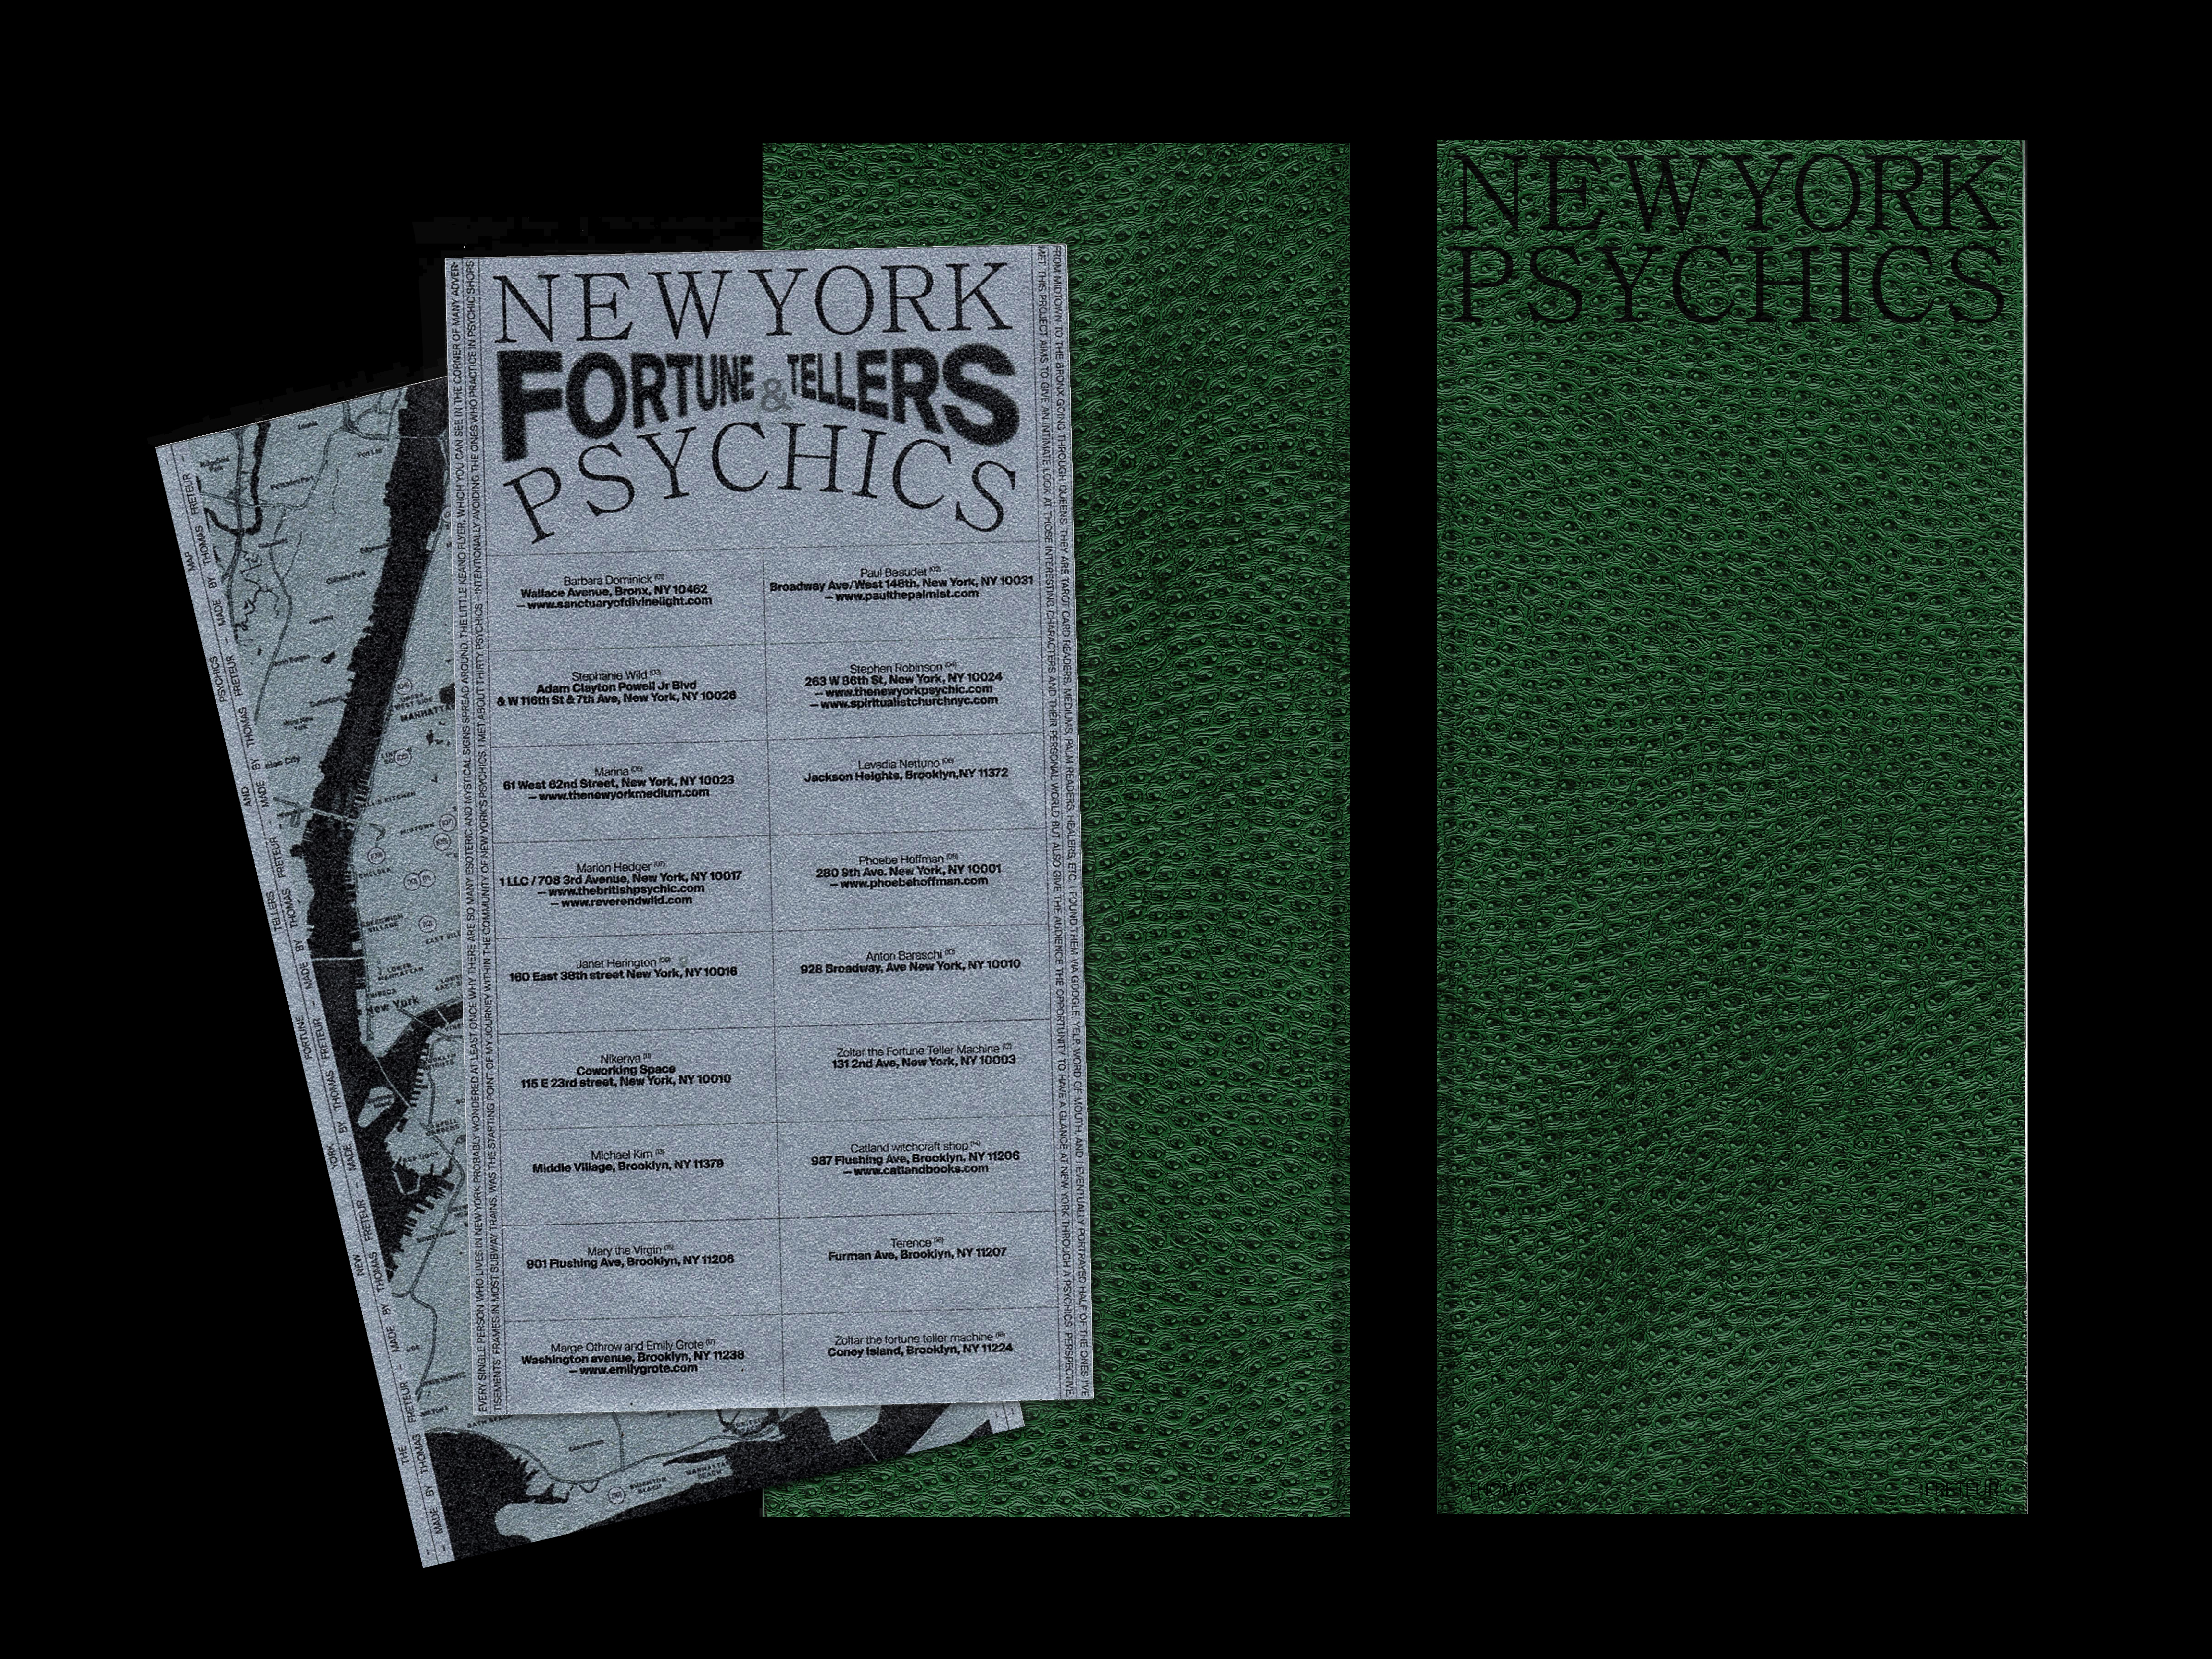 https://julienbaiamonte.com/content/1-projects/new-york-psychics/nyc_psychics_scan001_baiamonte_251019.png